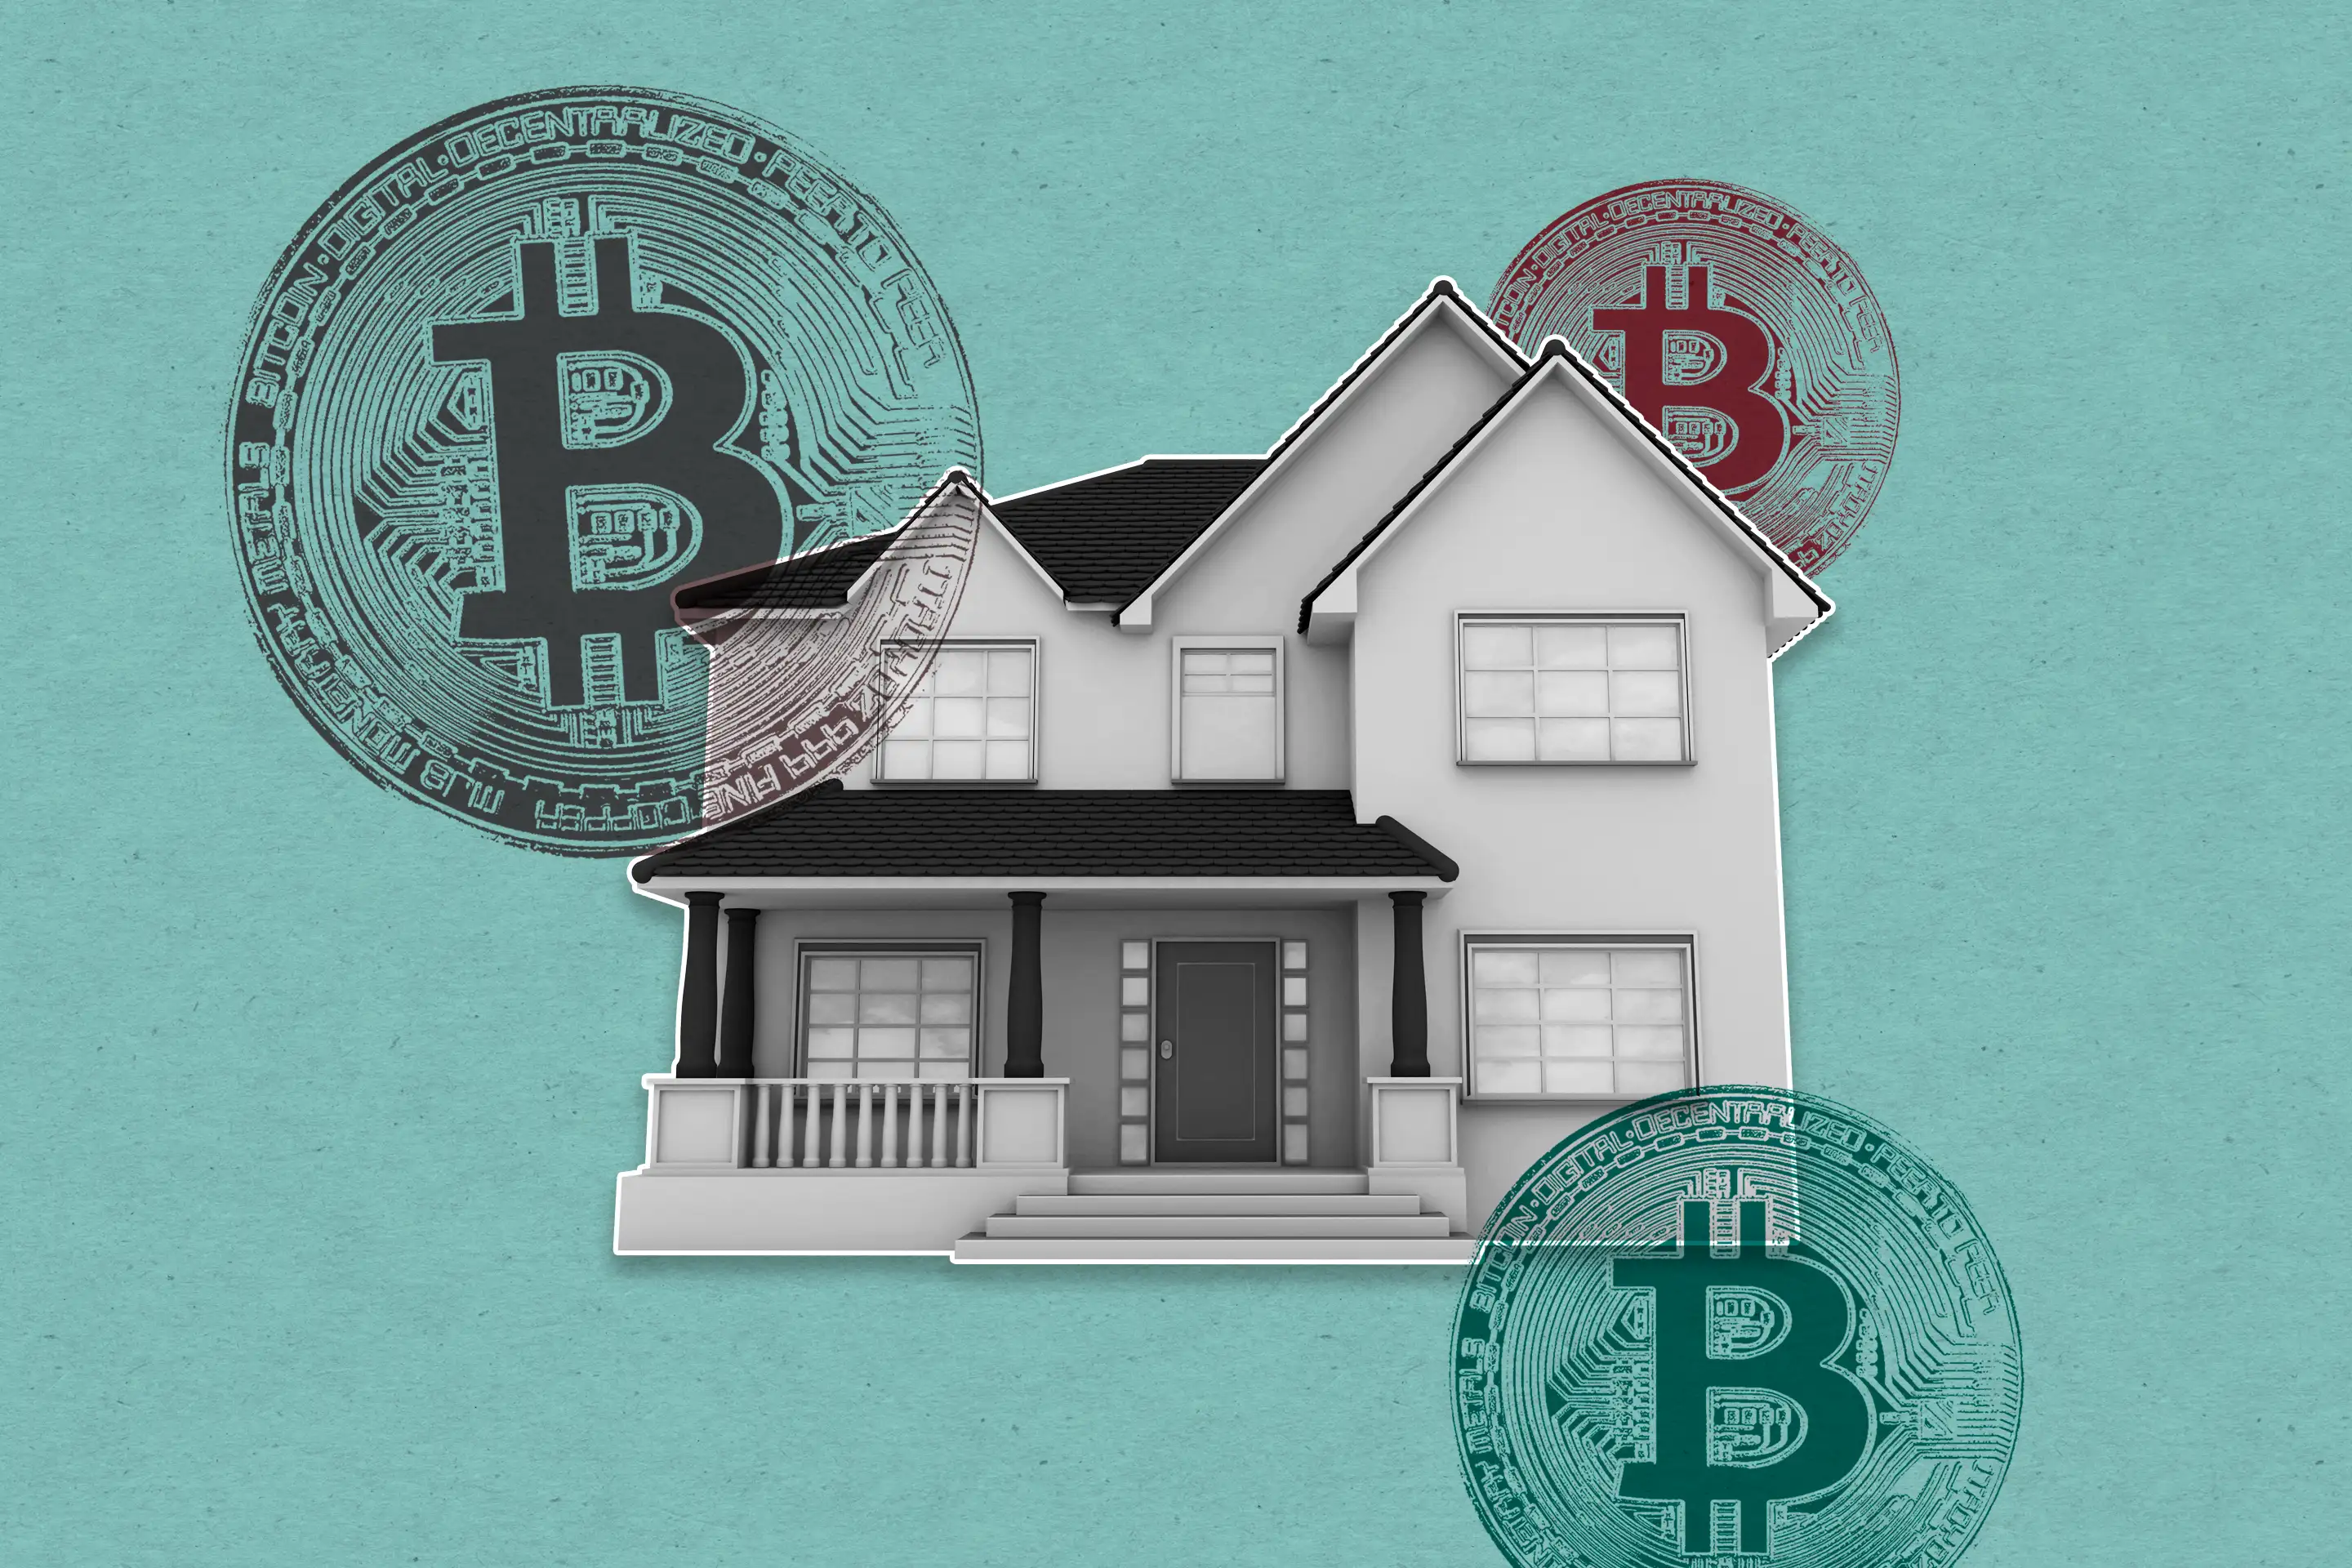 $k or Bitcoin? Texas startup lets people buy real estate with cryptocurrency